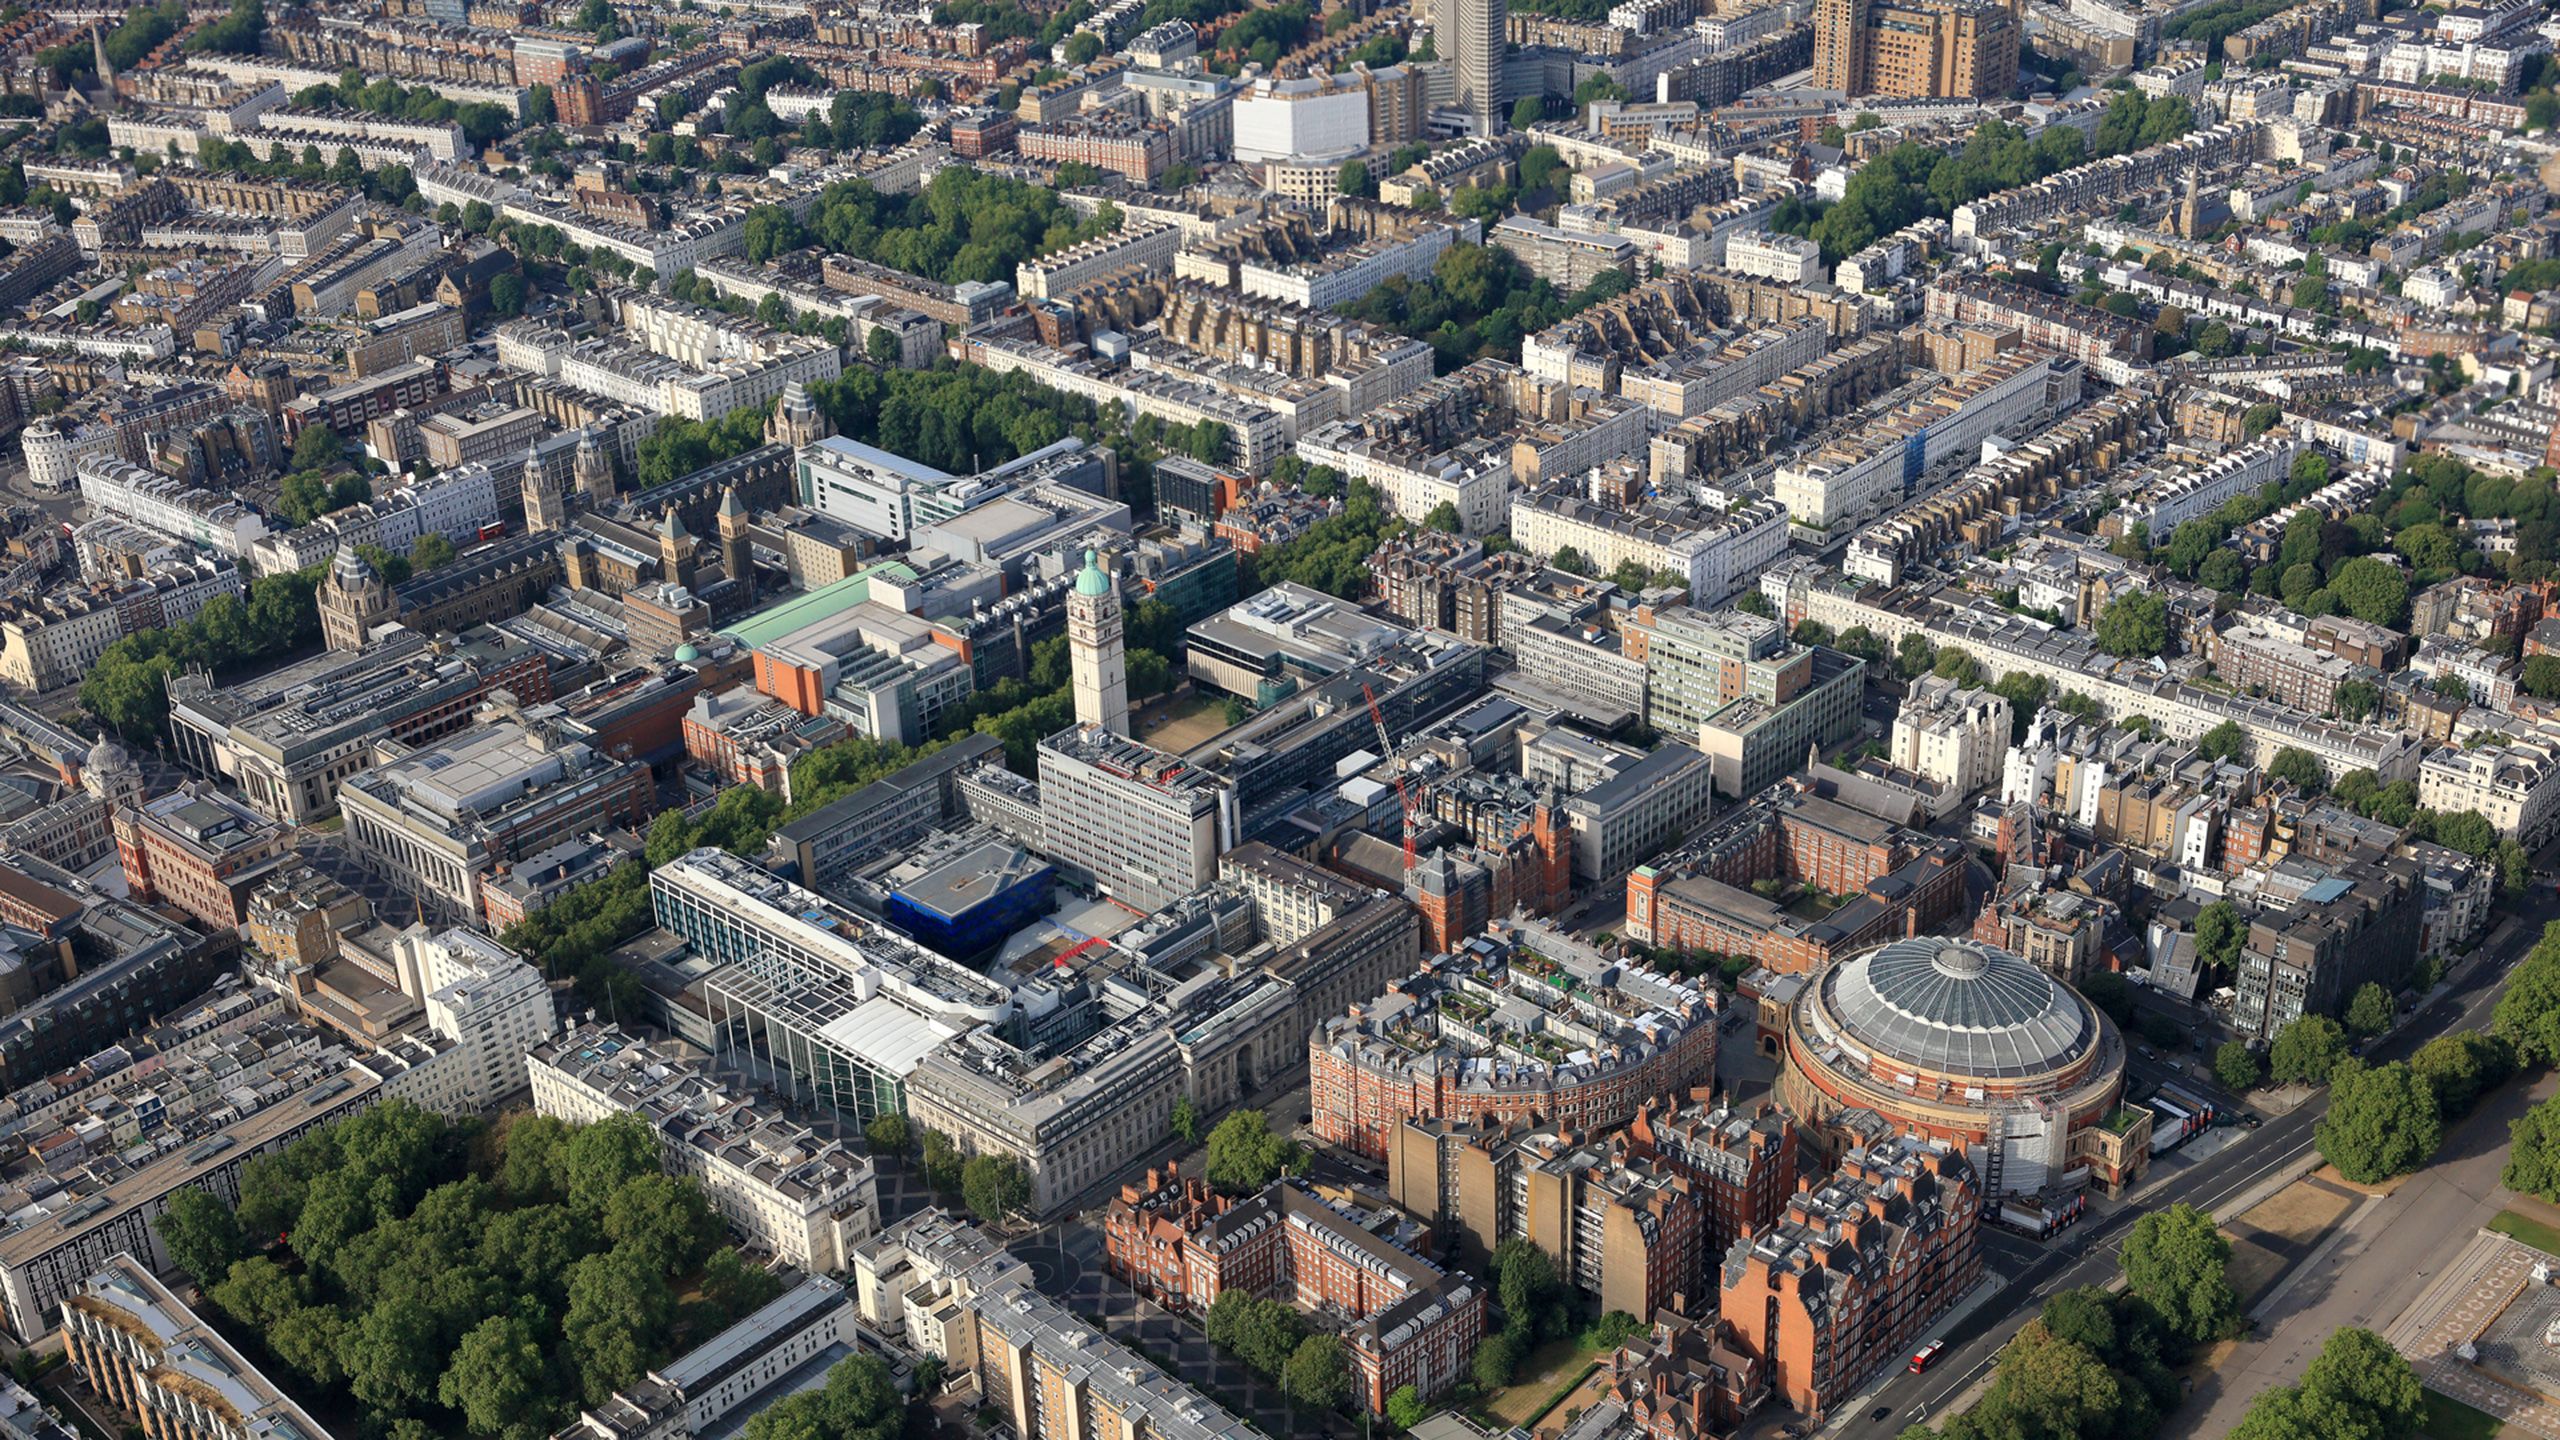 An aerial view of Imperial's South Kensington Campus